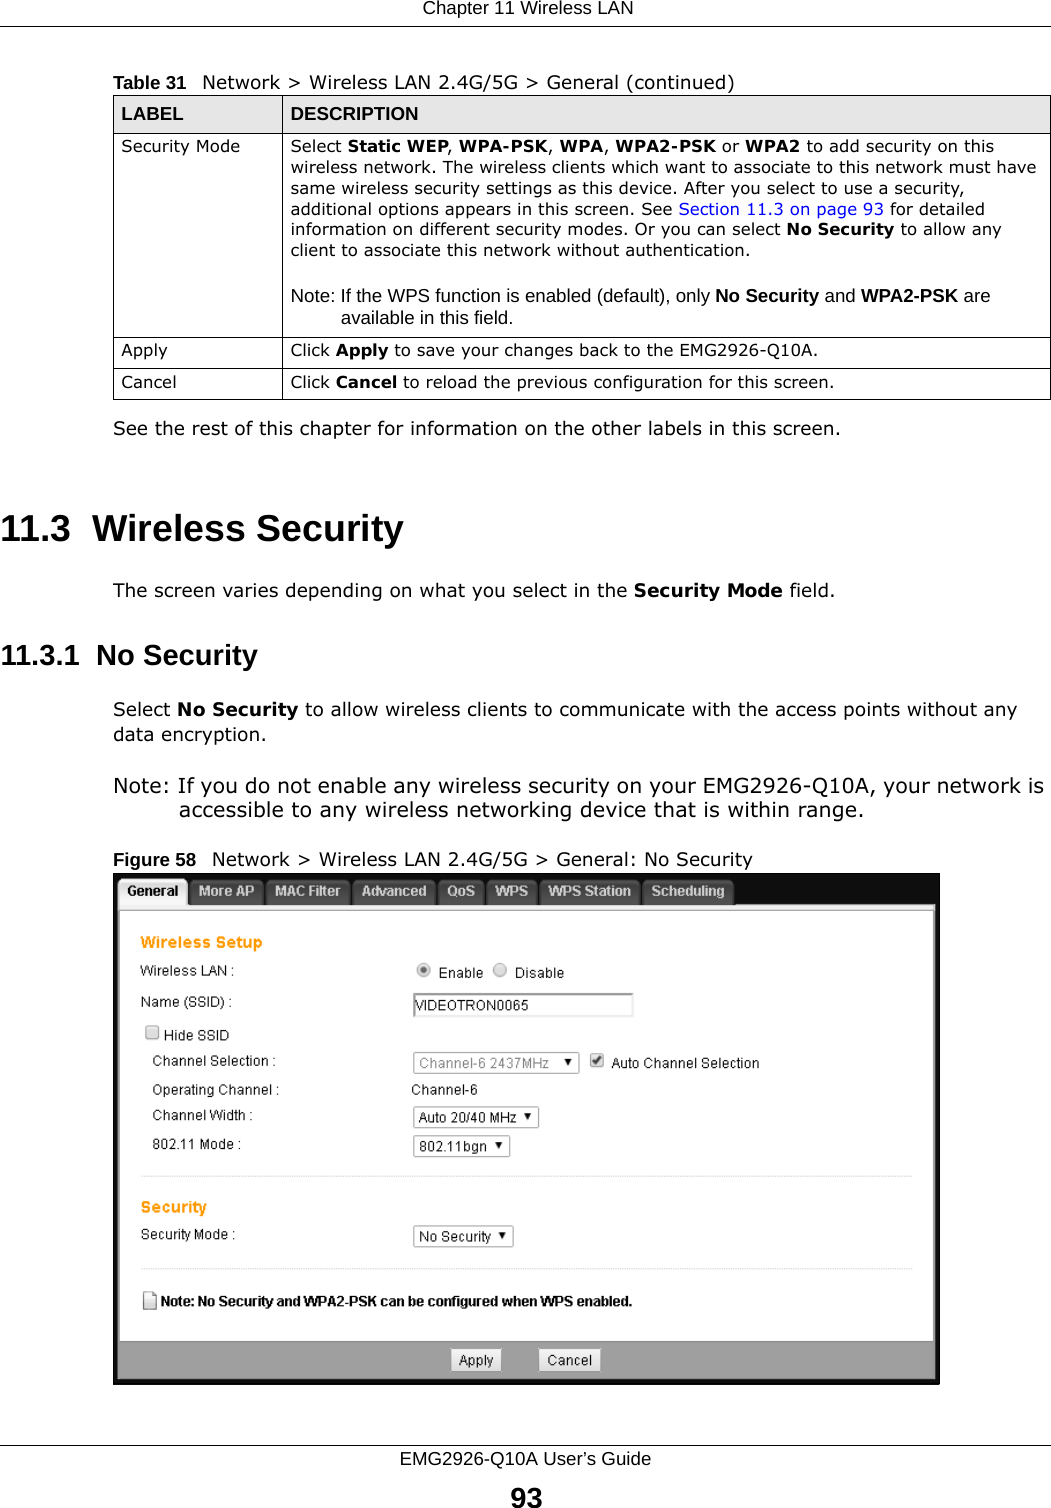  Chapter 11 Wireless LANEMG2926-Q10A User’s Guide93See the rest of this chapter for information on the other labels in this screen. 11.3  Wireless SecurityThe screen varies depending on what you select in the Security Mode field.11.3.1  No SecuritySelect No Security to allow wireless clients to communicate with the access points without any data encryption.Note: If you do not enable any wireless security on your EMG2926-Q10A, your network is accessible to any wireless networking device that is within range.Figure 58   Network &gt; Wireless LAN 2.4G/5G &gt; General: No SecuritySecurity Mode Select Static WEP, WPA-PSK, WPA, WPA2-PSK or WPA2 to add security on this wireless network. The wireless clients which want to associate to this network must have same wireless security settings as this device. After you select to use a security, additional options appears in this screen. See Section 11.3 on page 93 for detailed information on different security modes. Or you can select No Security to allow any client to associate this network without authentication.Note: If the WPS function is enabled (default), only No Security and WPA2-PSK are available in this field.Apply Click Apply to save your changes back to the EMG2926-Q10A.Cancel Click Cancel to reload the previous configuration for this screen.Table 31   Network &gt; Wireless LAN 2.4G/5G &gt; General (continued)LABEL DESCRIPTION